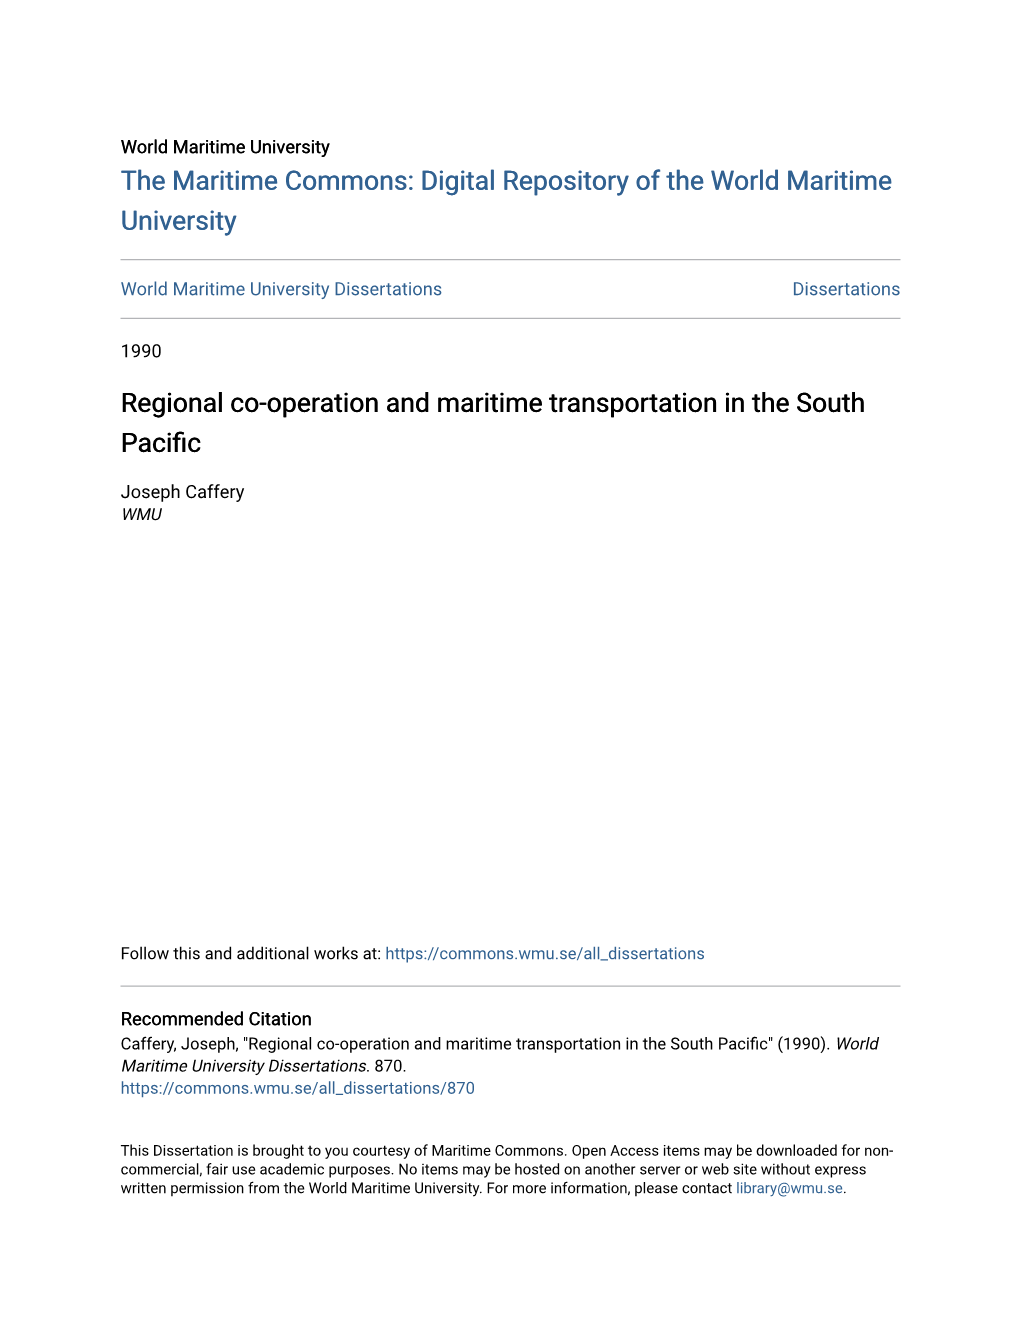 Regional Co-Operation and Maritime Transportation in the South Pacific